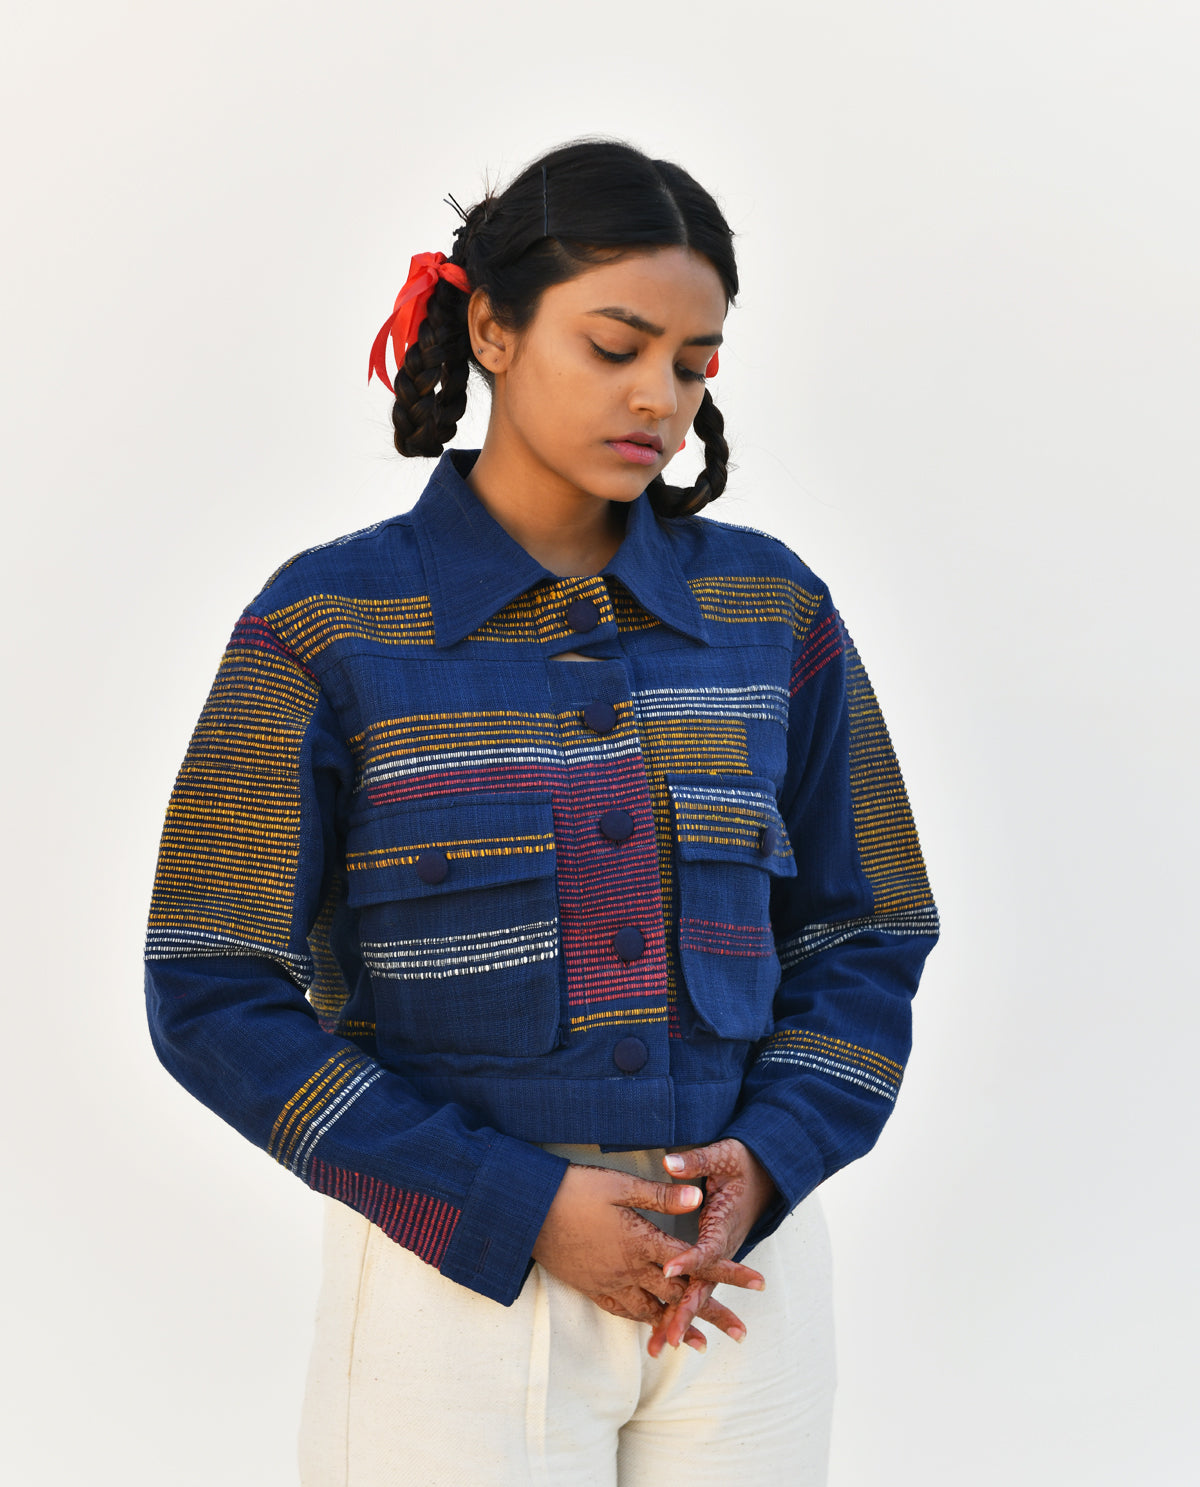 Jacket embodies the classic collar jacket silhouette and is handwoven in an extra weft technique.